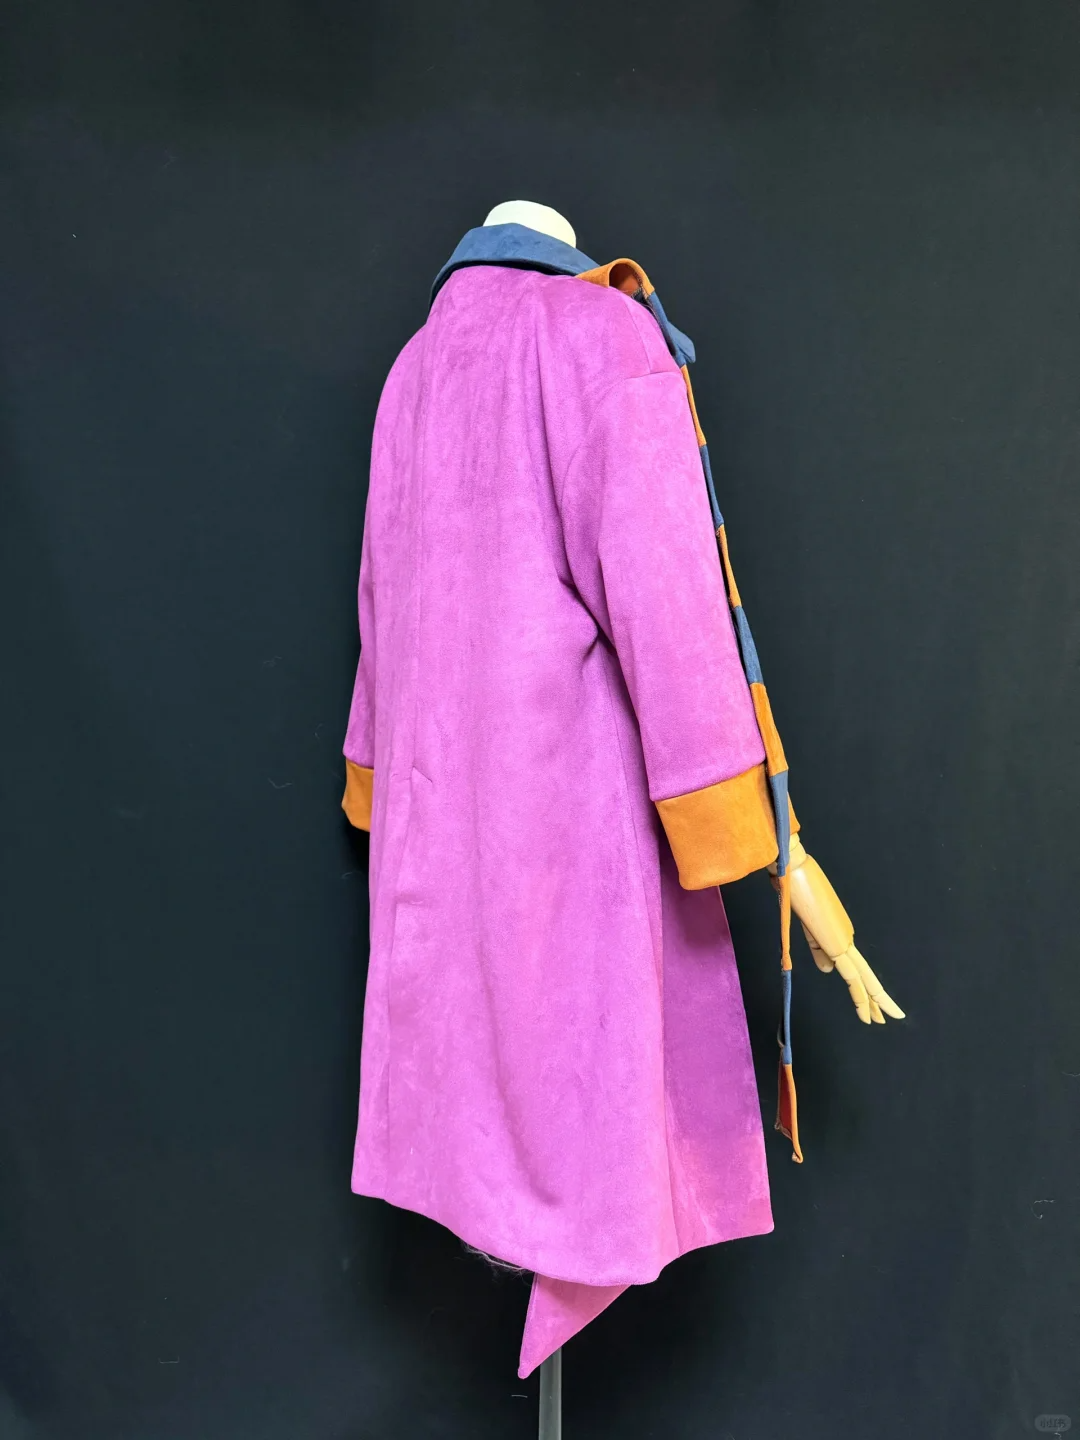 Hachimicos Fate Grand Order FGO Christopher Columbus Cosplay Costume From Hachimicos